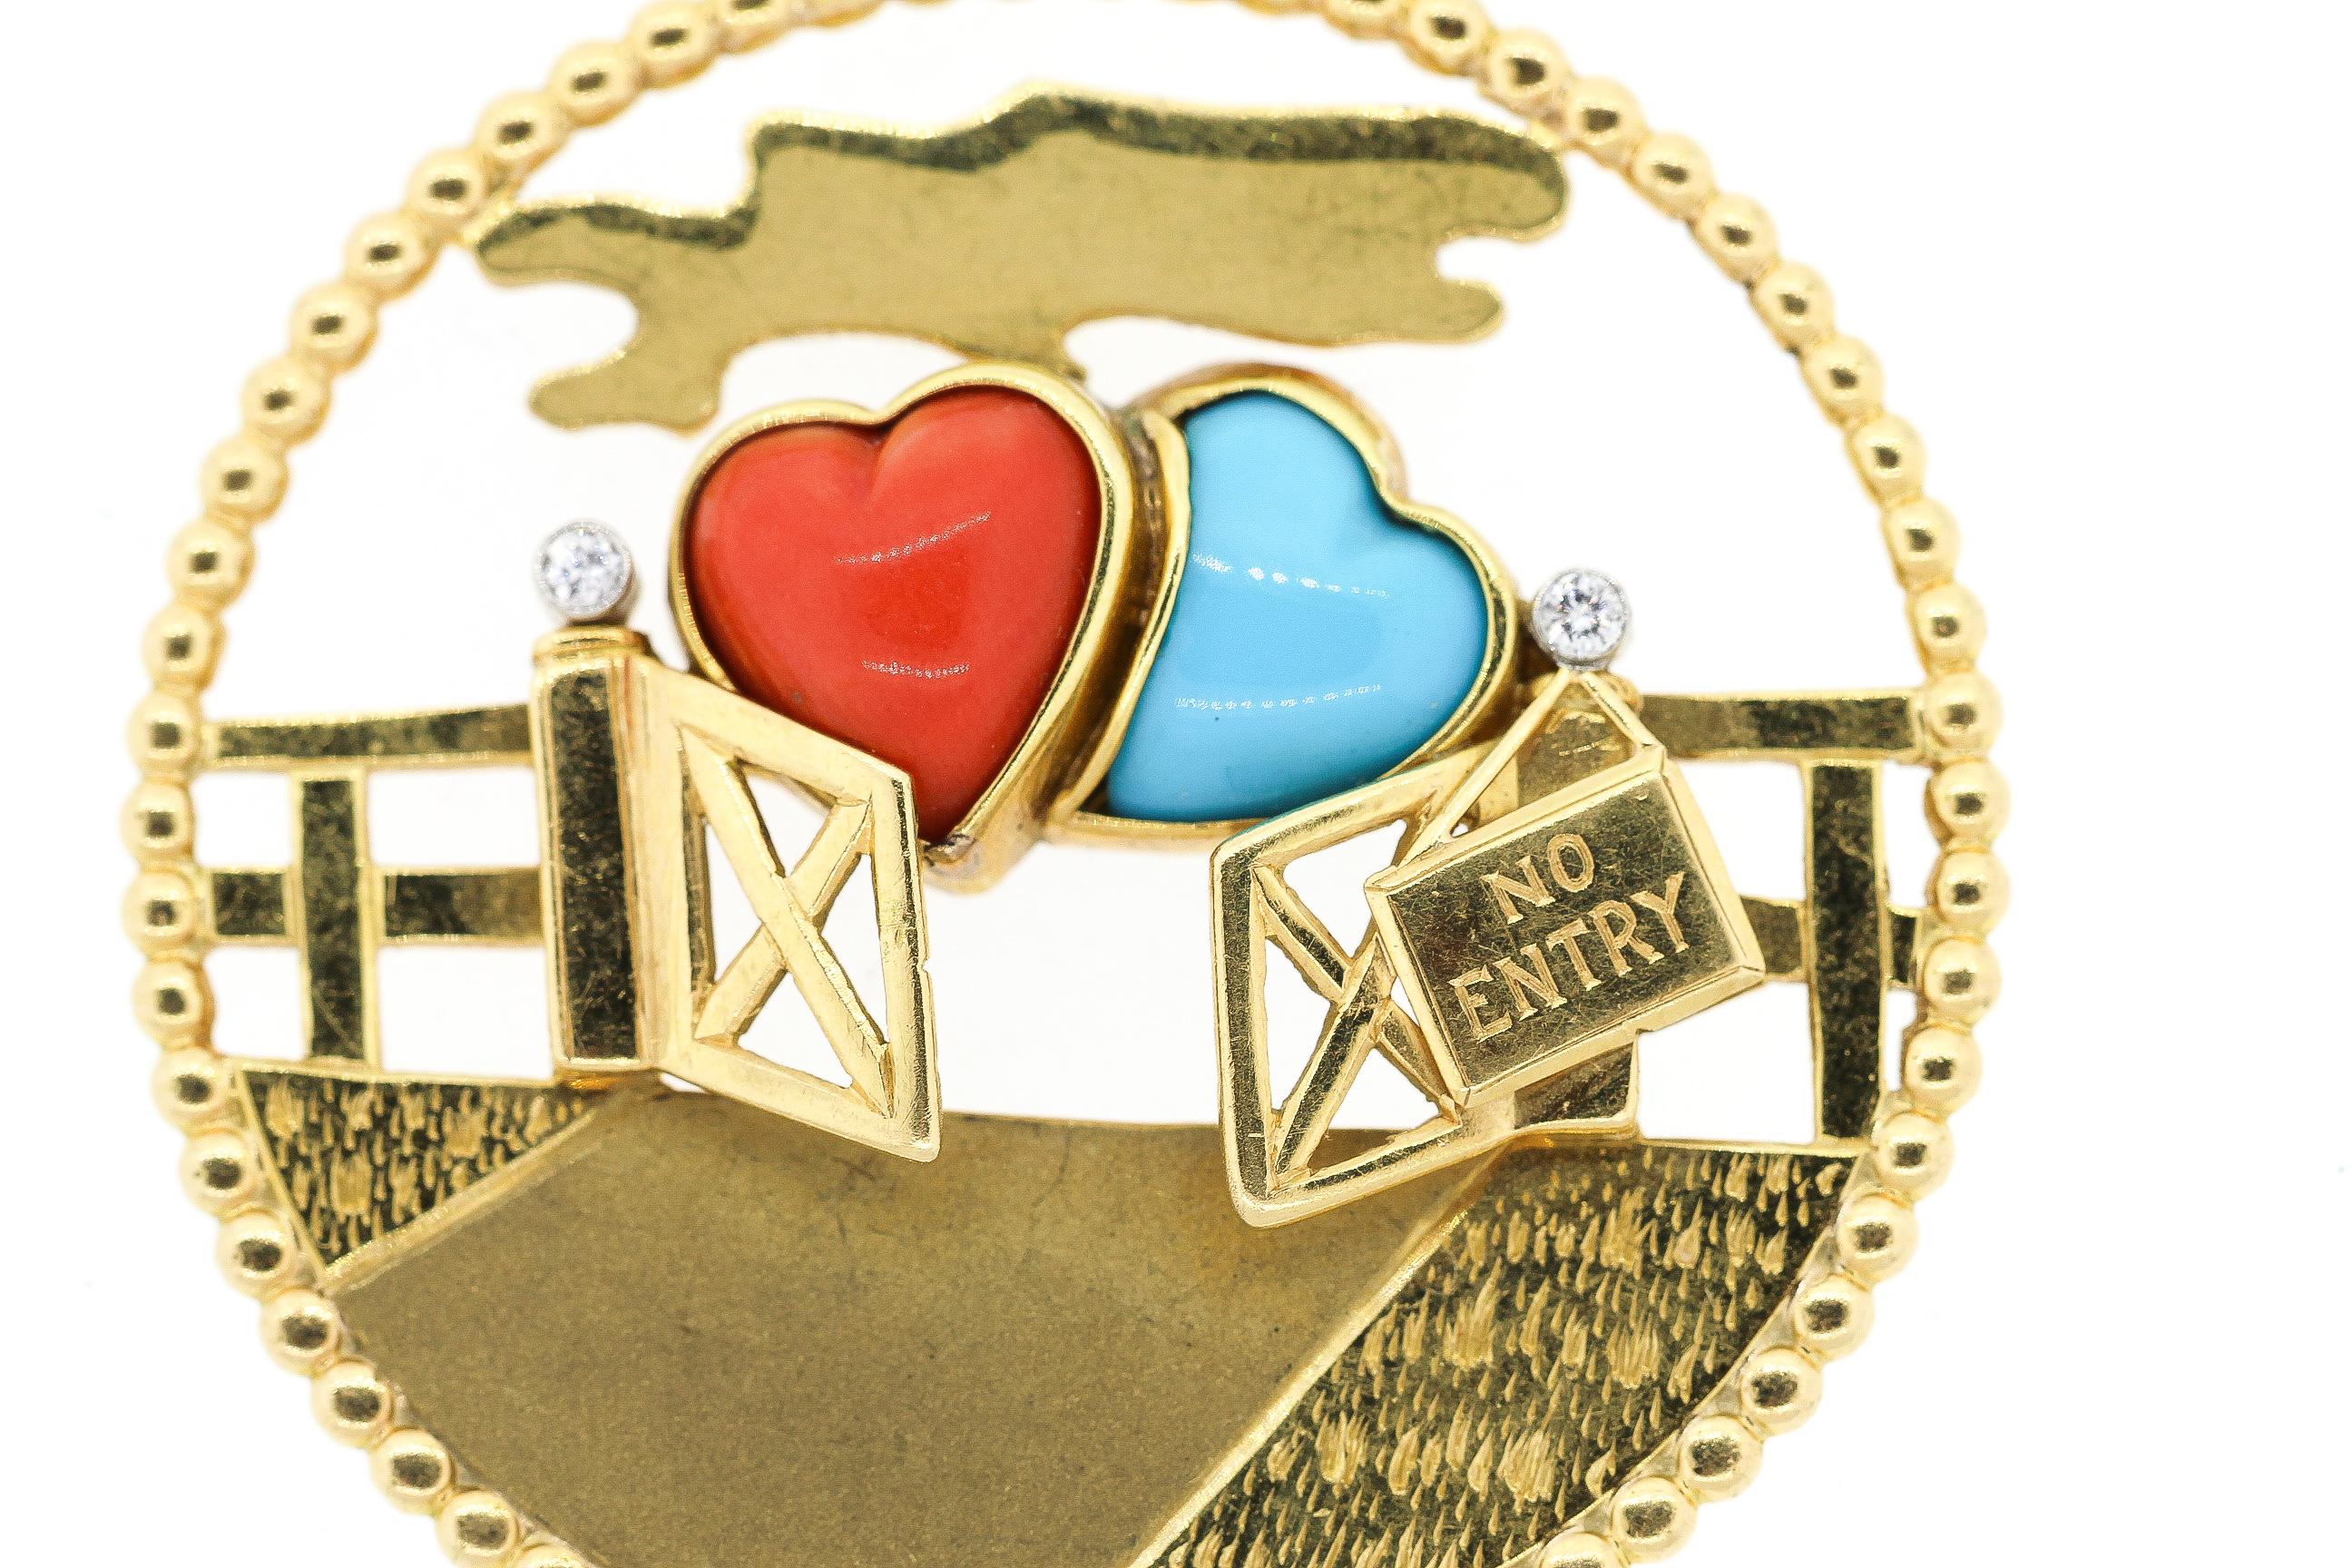 A 1960s vintage 18k yellow gold charm set with turquoise and coral by Cartier. The charm or pendant depicts two hearts entering a gate with the sign NO ENTRY marked as the gate closes behind them. The charm is a whimsical love charm. The charm has a